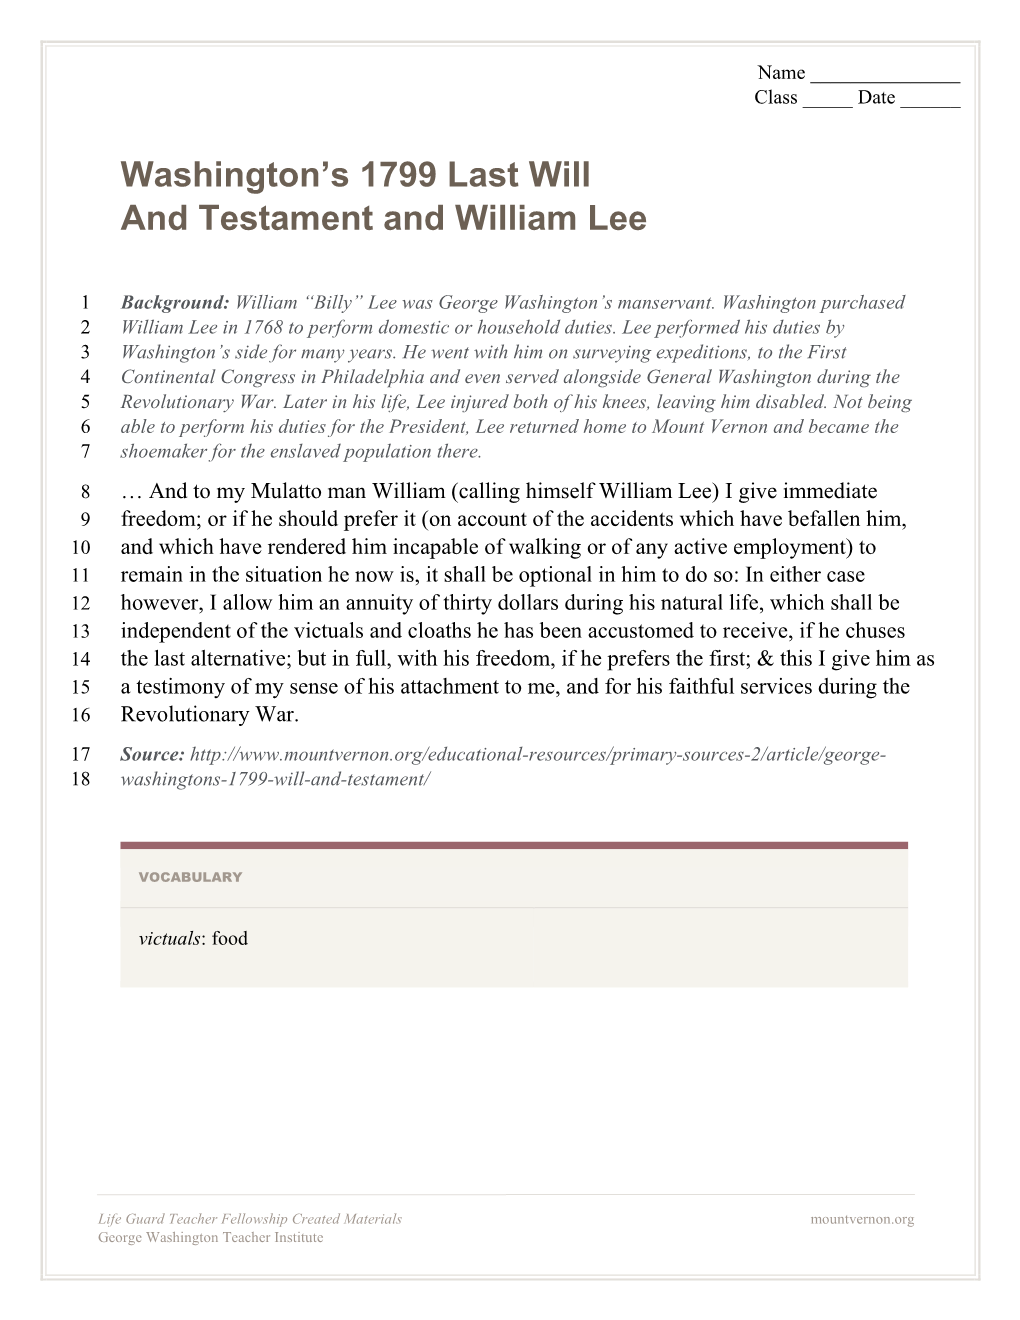 Washington's 1799 Last Will and Testament and William